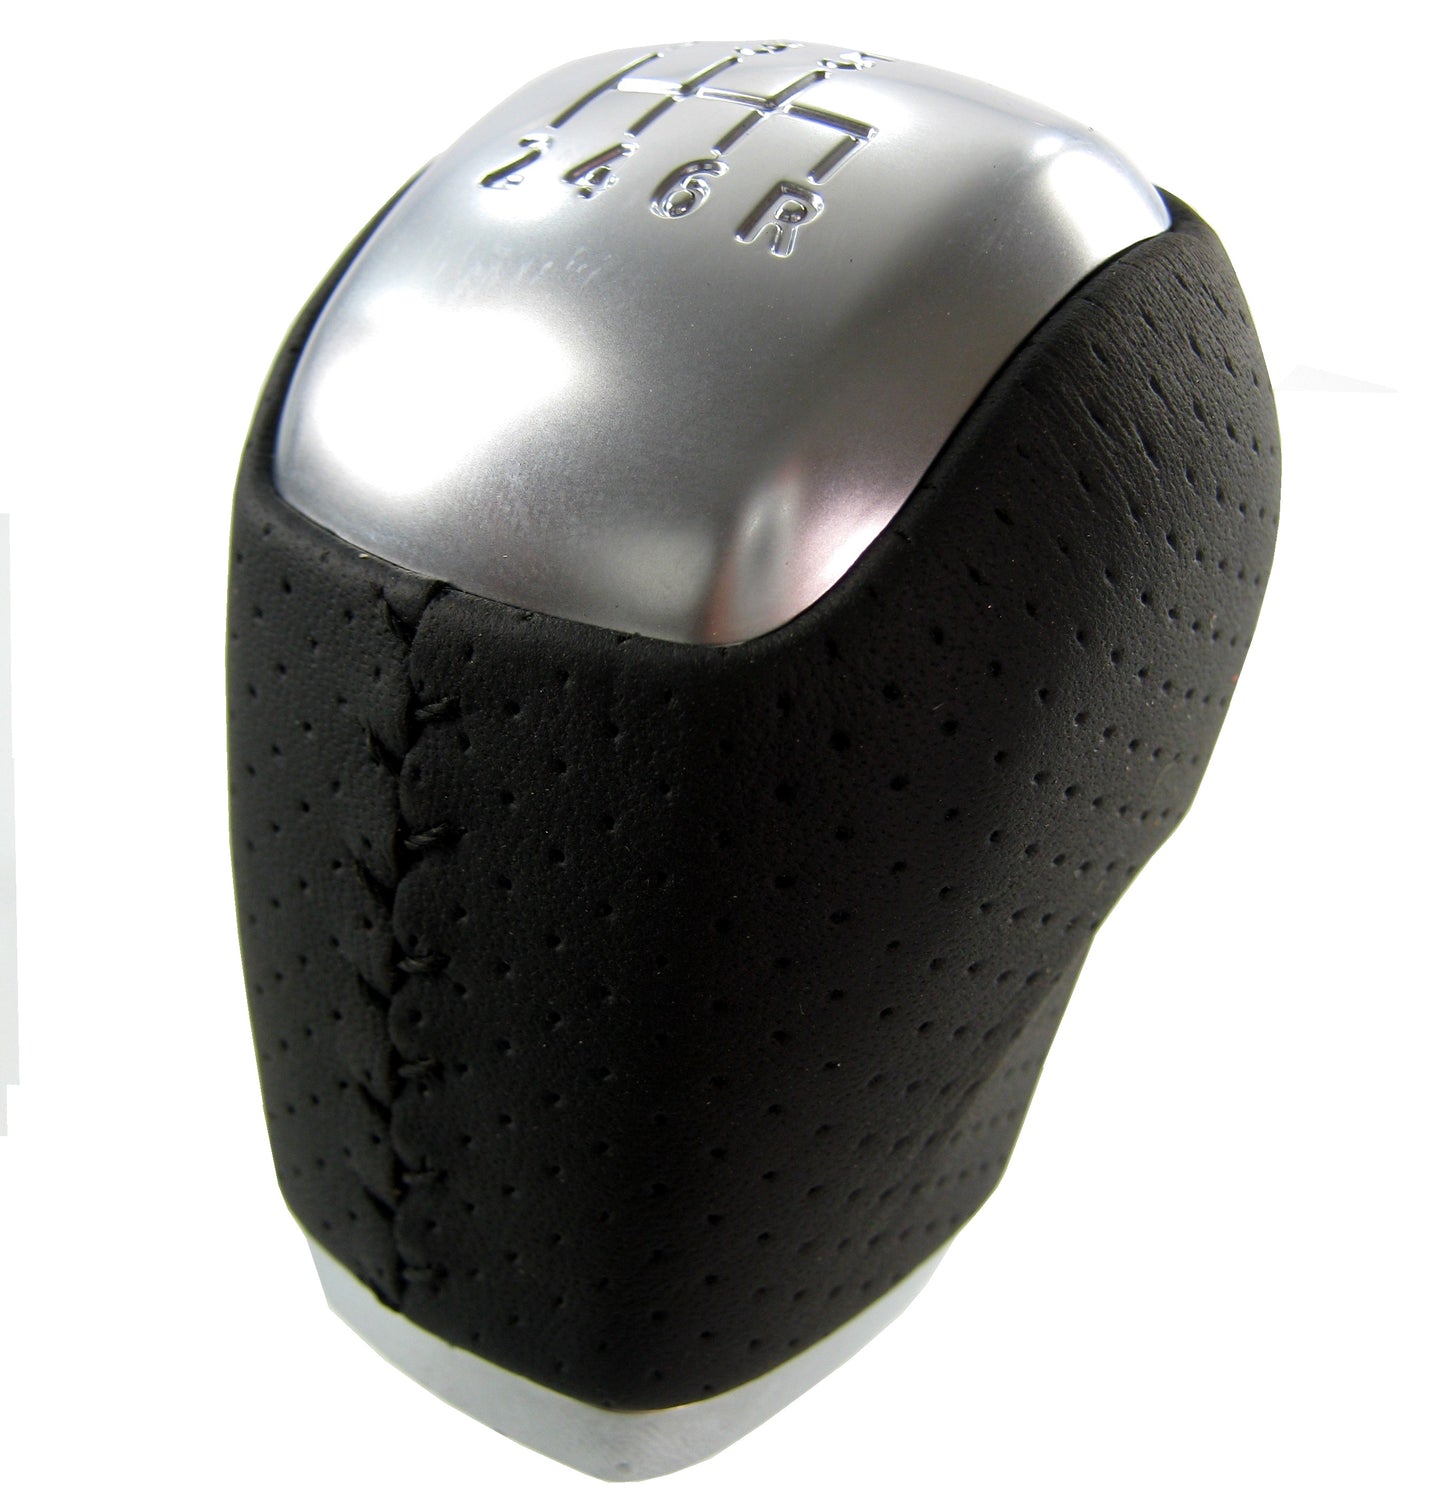 Manual Gear Knob - 6 Speed - Perf Leather & Alloy for Nissan Navara NP300